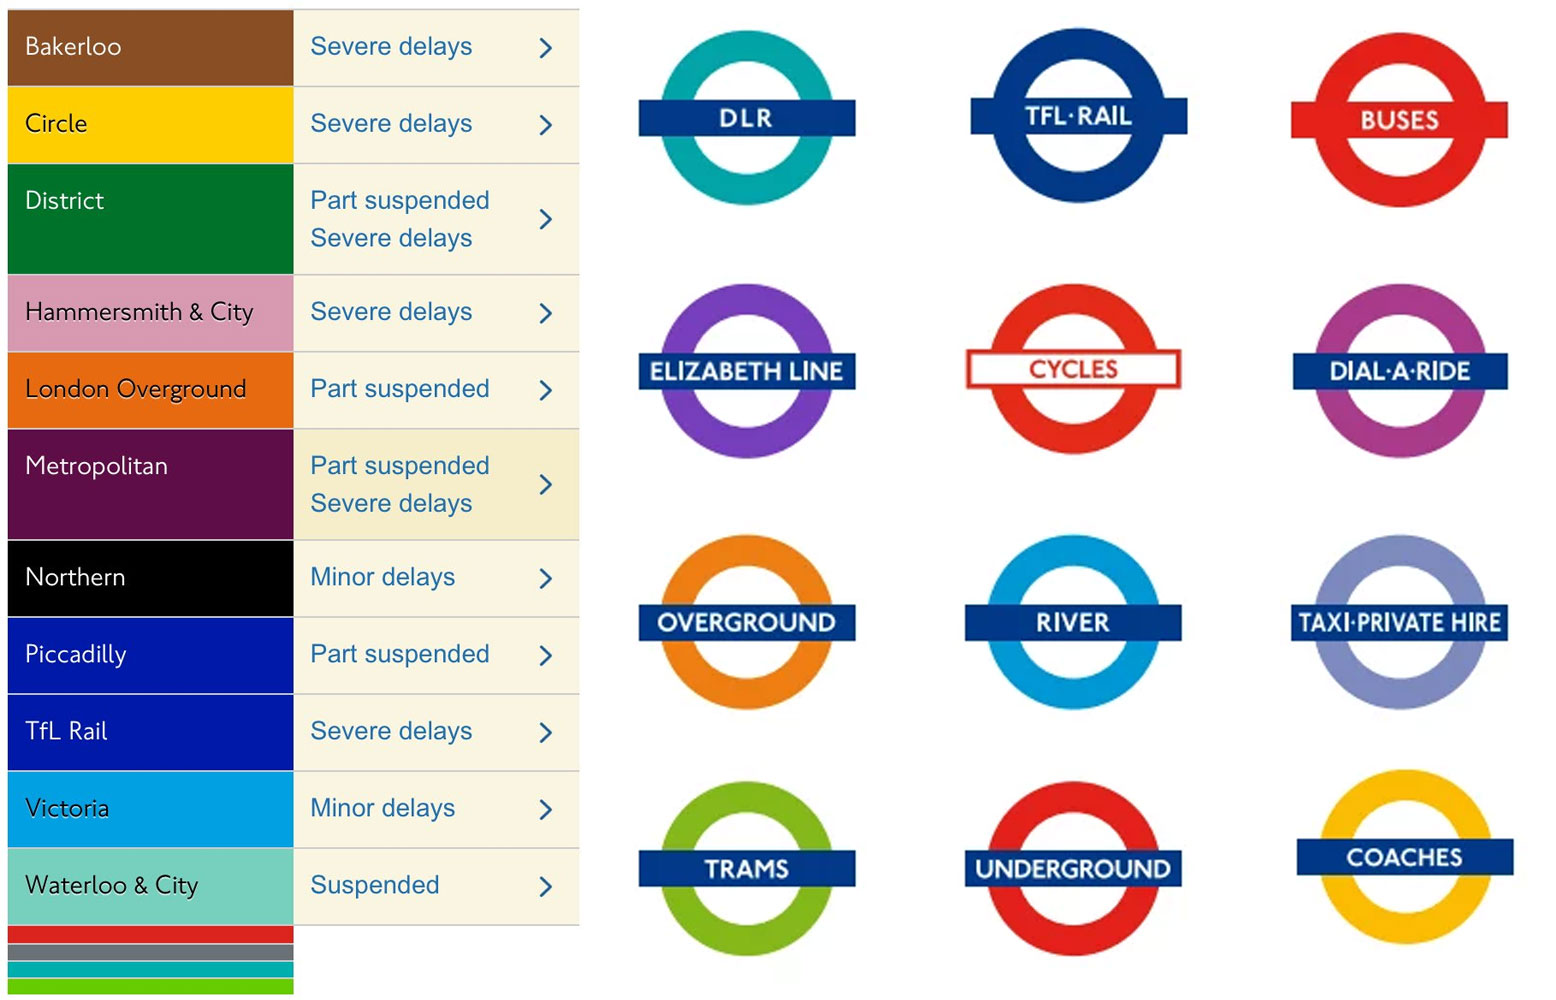 Higher council tax to help fund TfL's defecit